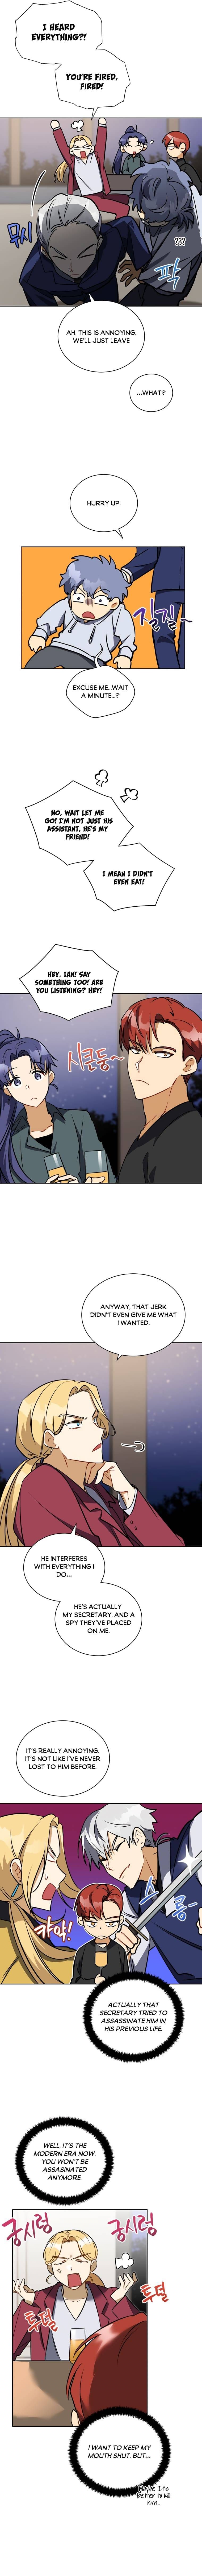 Beast with Flowers Chapter 108 page 5